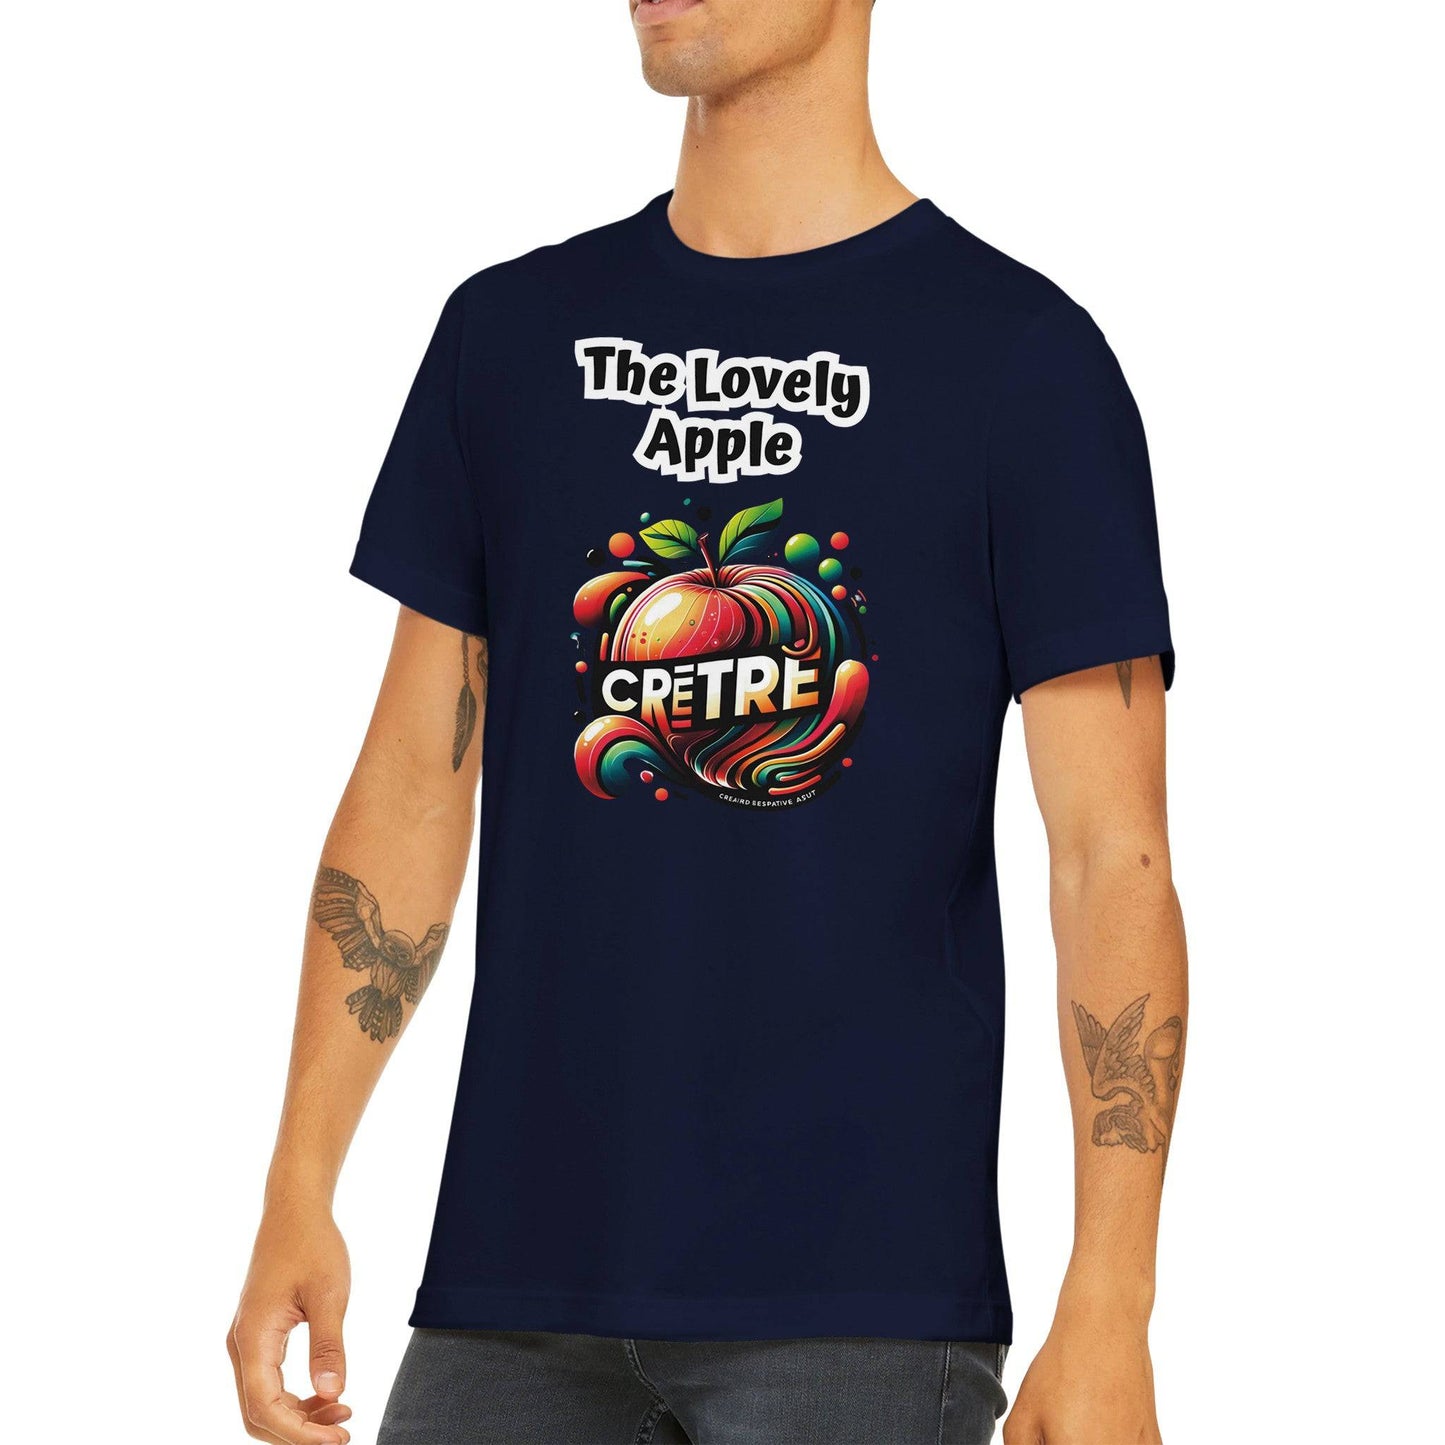 Classic Crewneck "Orchard Fresh" The lovely Apple T-Shirt - 100% soft, breathable cotton - BeinCart